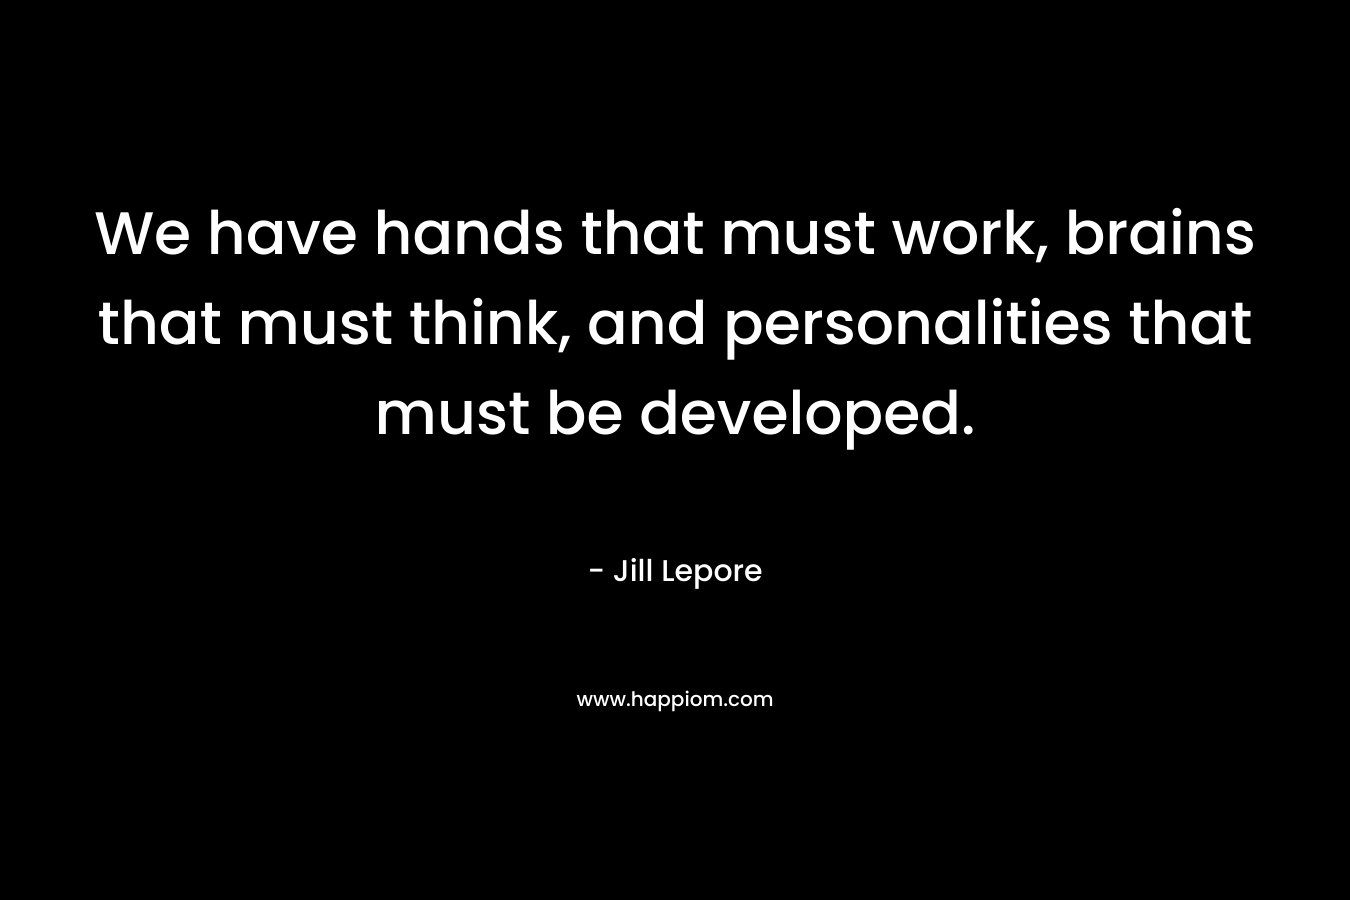 We have hands that must work, brains that must think, and personalities that must be developed. – Jill Lepore